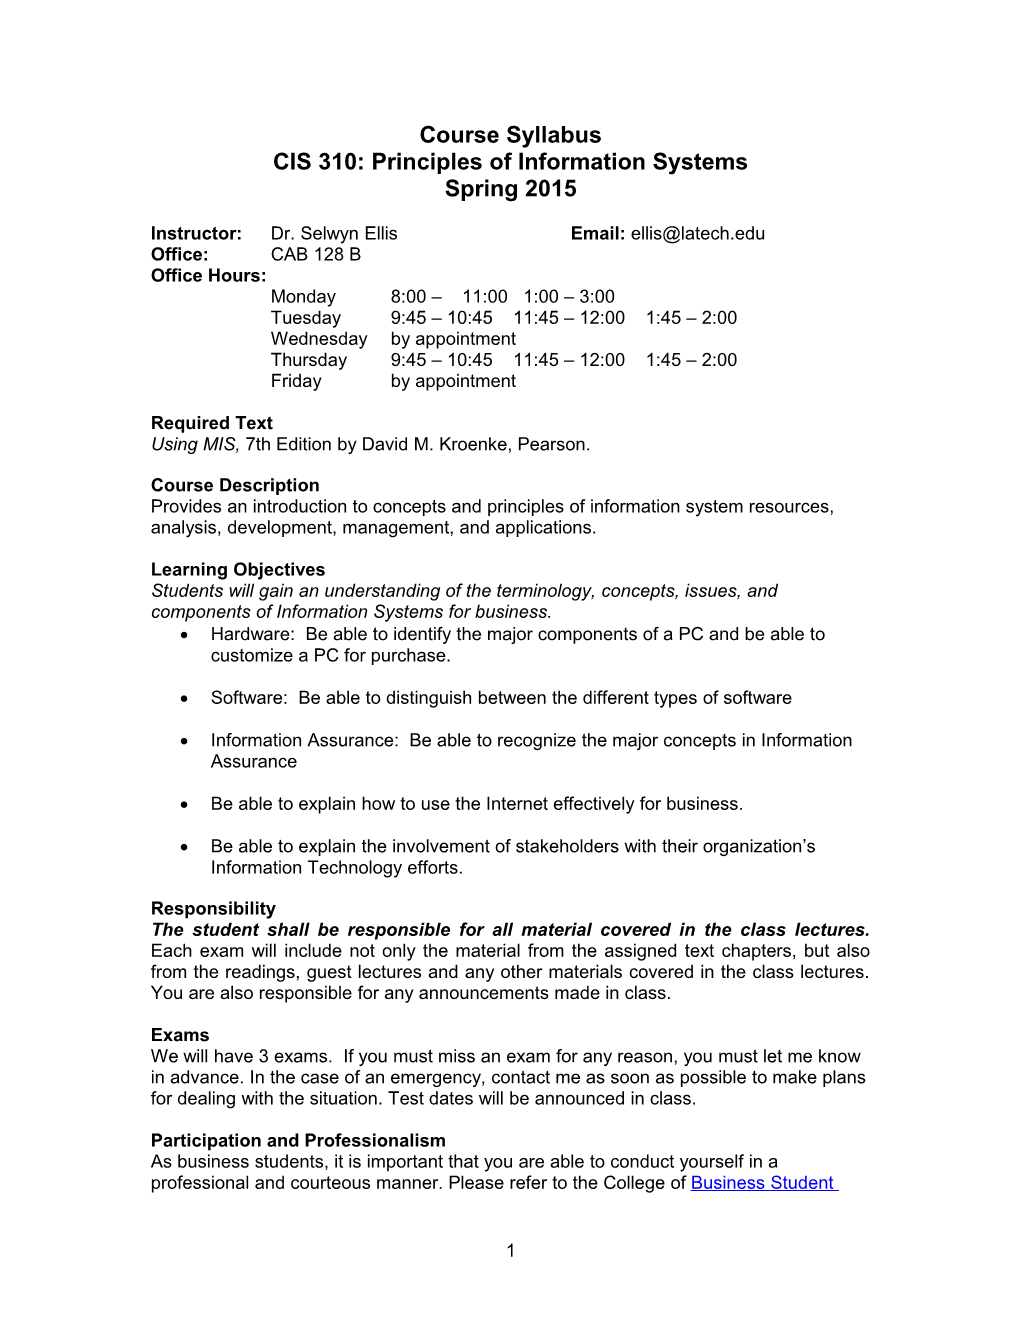 CIS 310: Principles of Information Systems